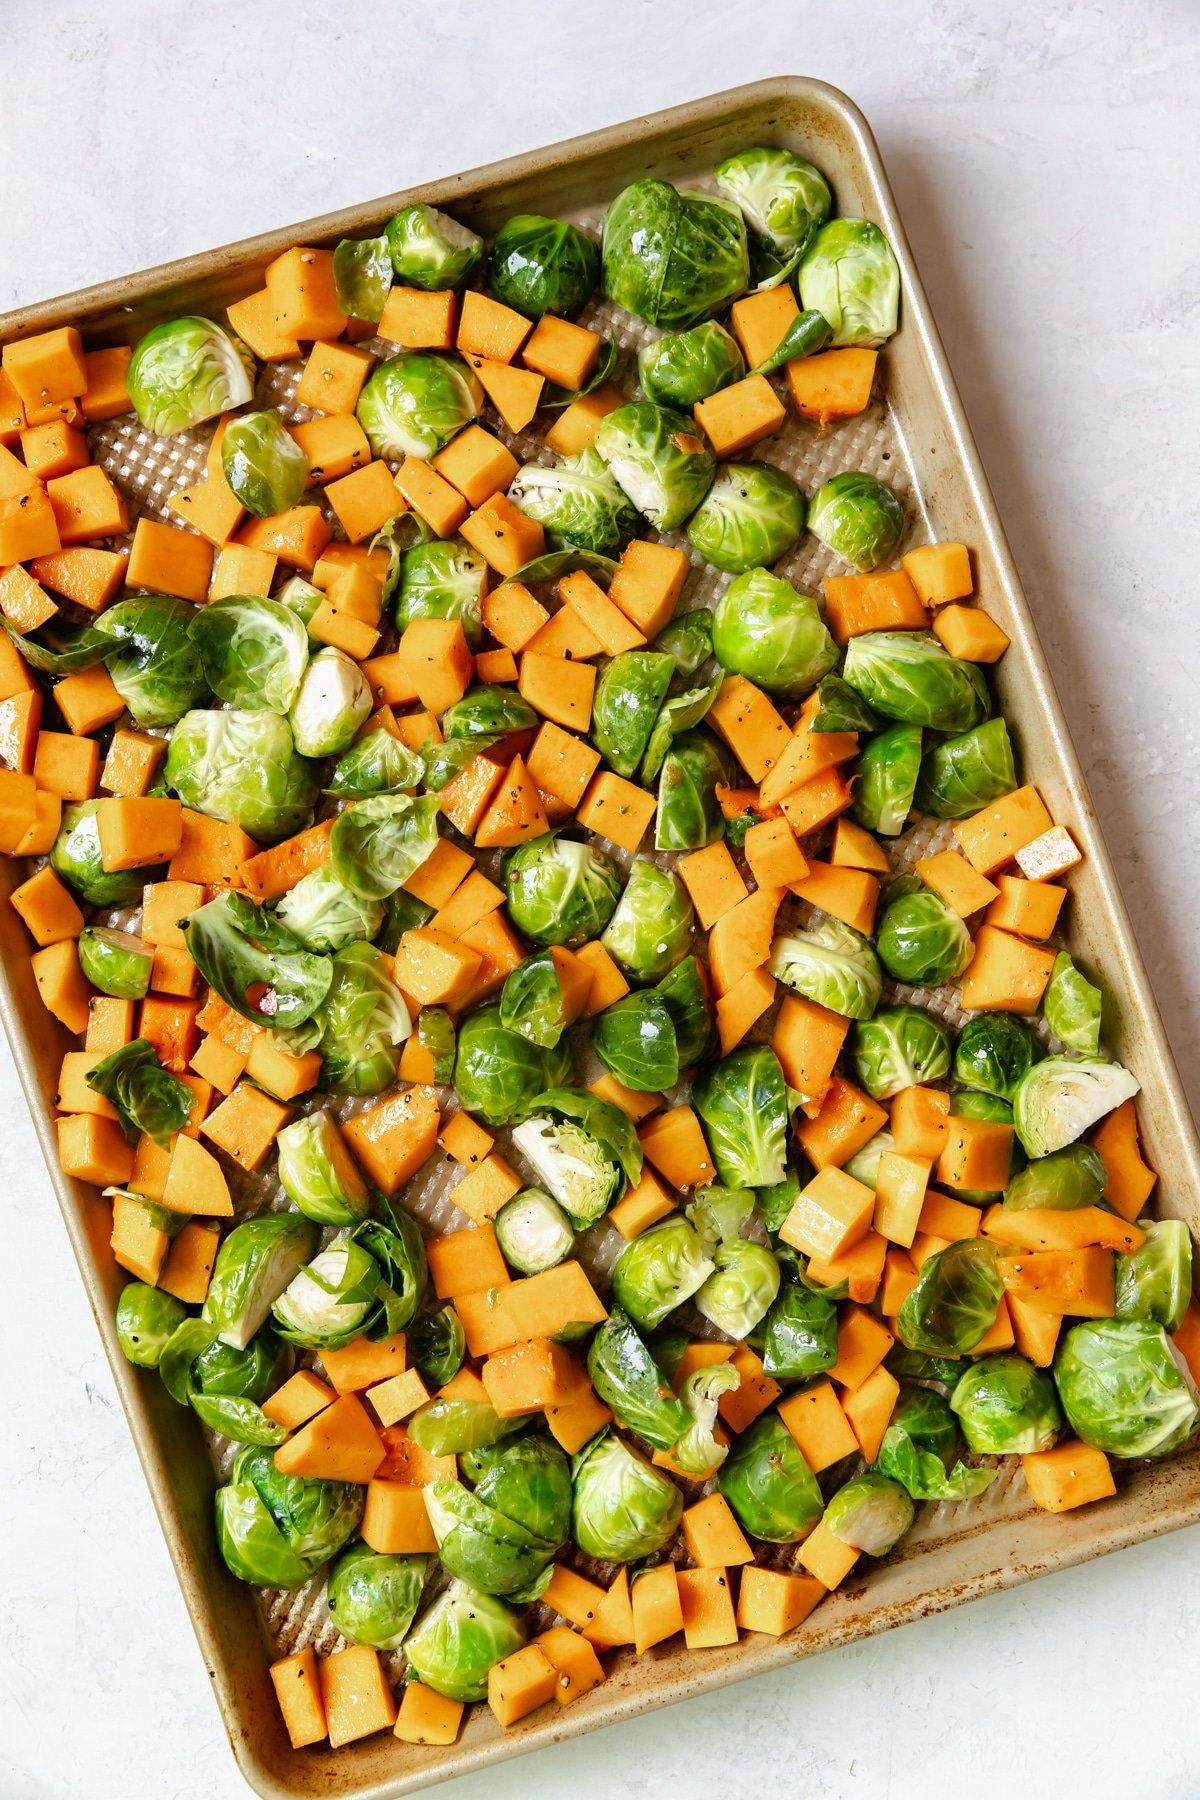 roasted brussels sprouts and butternut squash on a gold sheet pan tossed in olive oil, salt and pepper